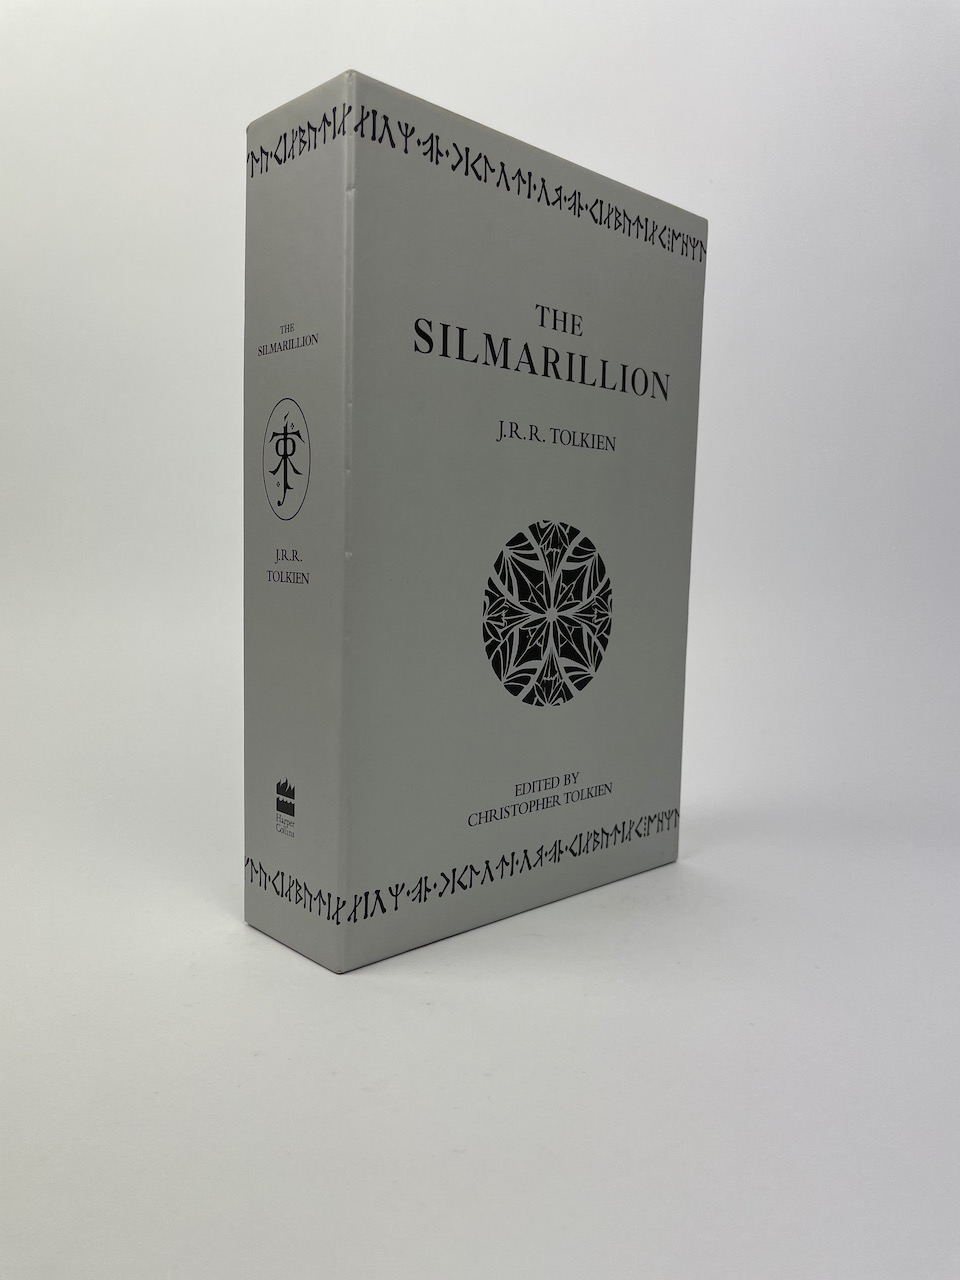 
The Silmarillion Limited Collector's Box 2